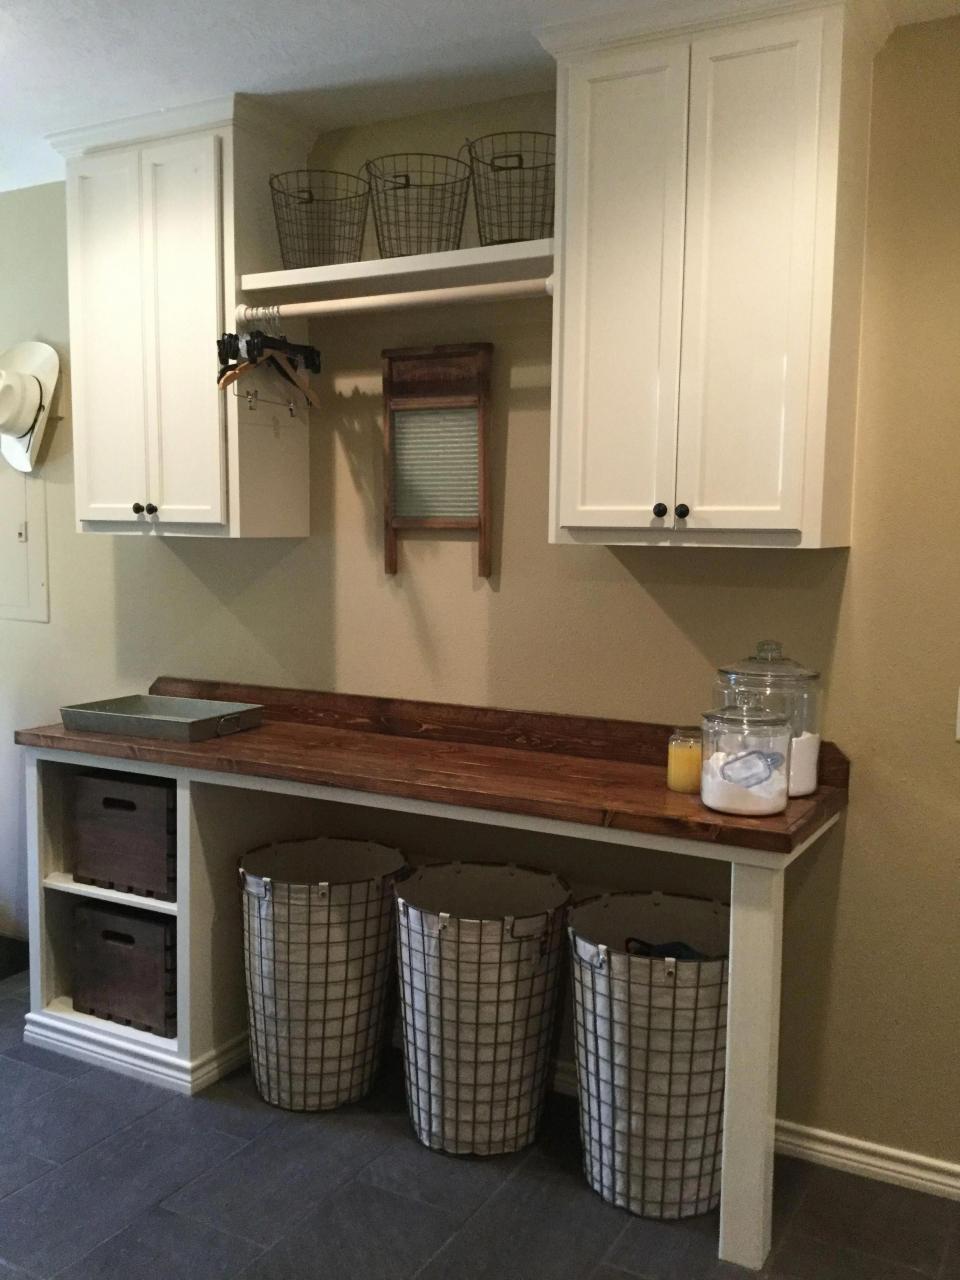 See our site for more info on "laundry room storage shelves". It is an